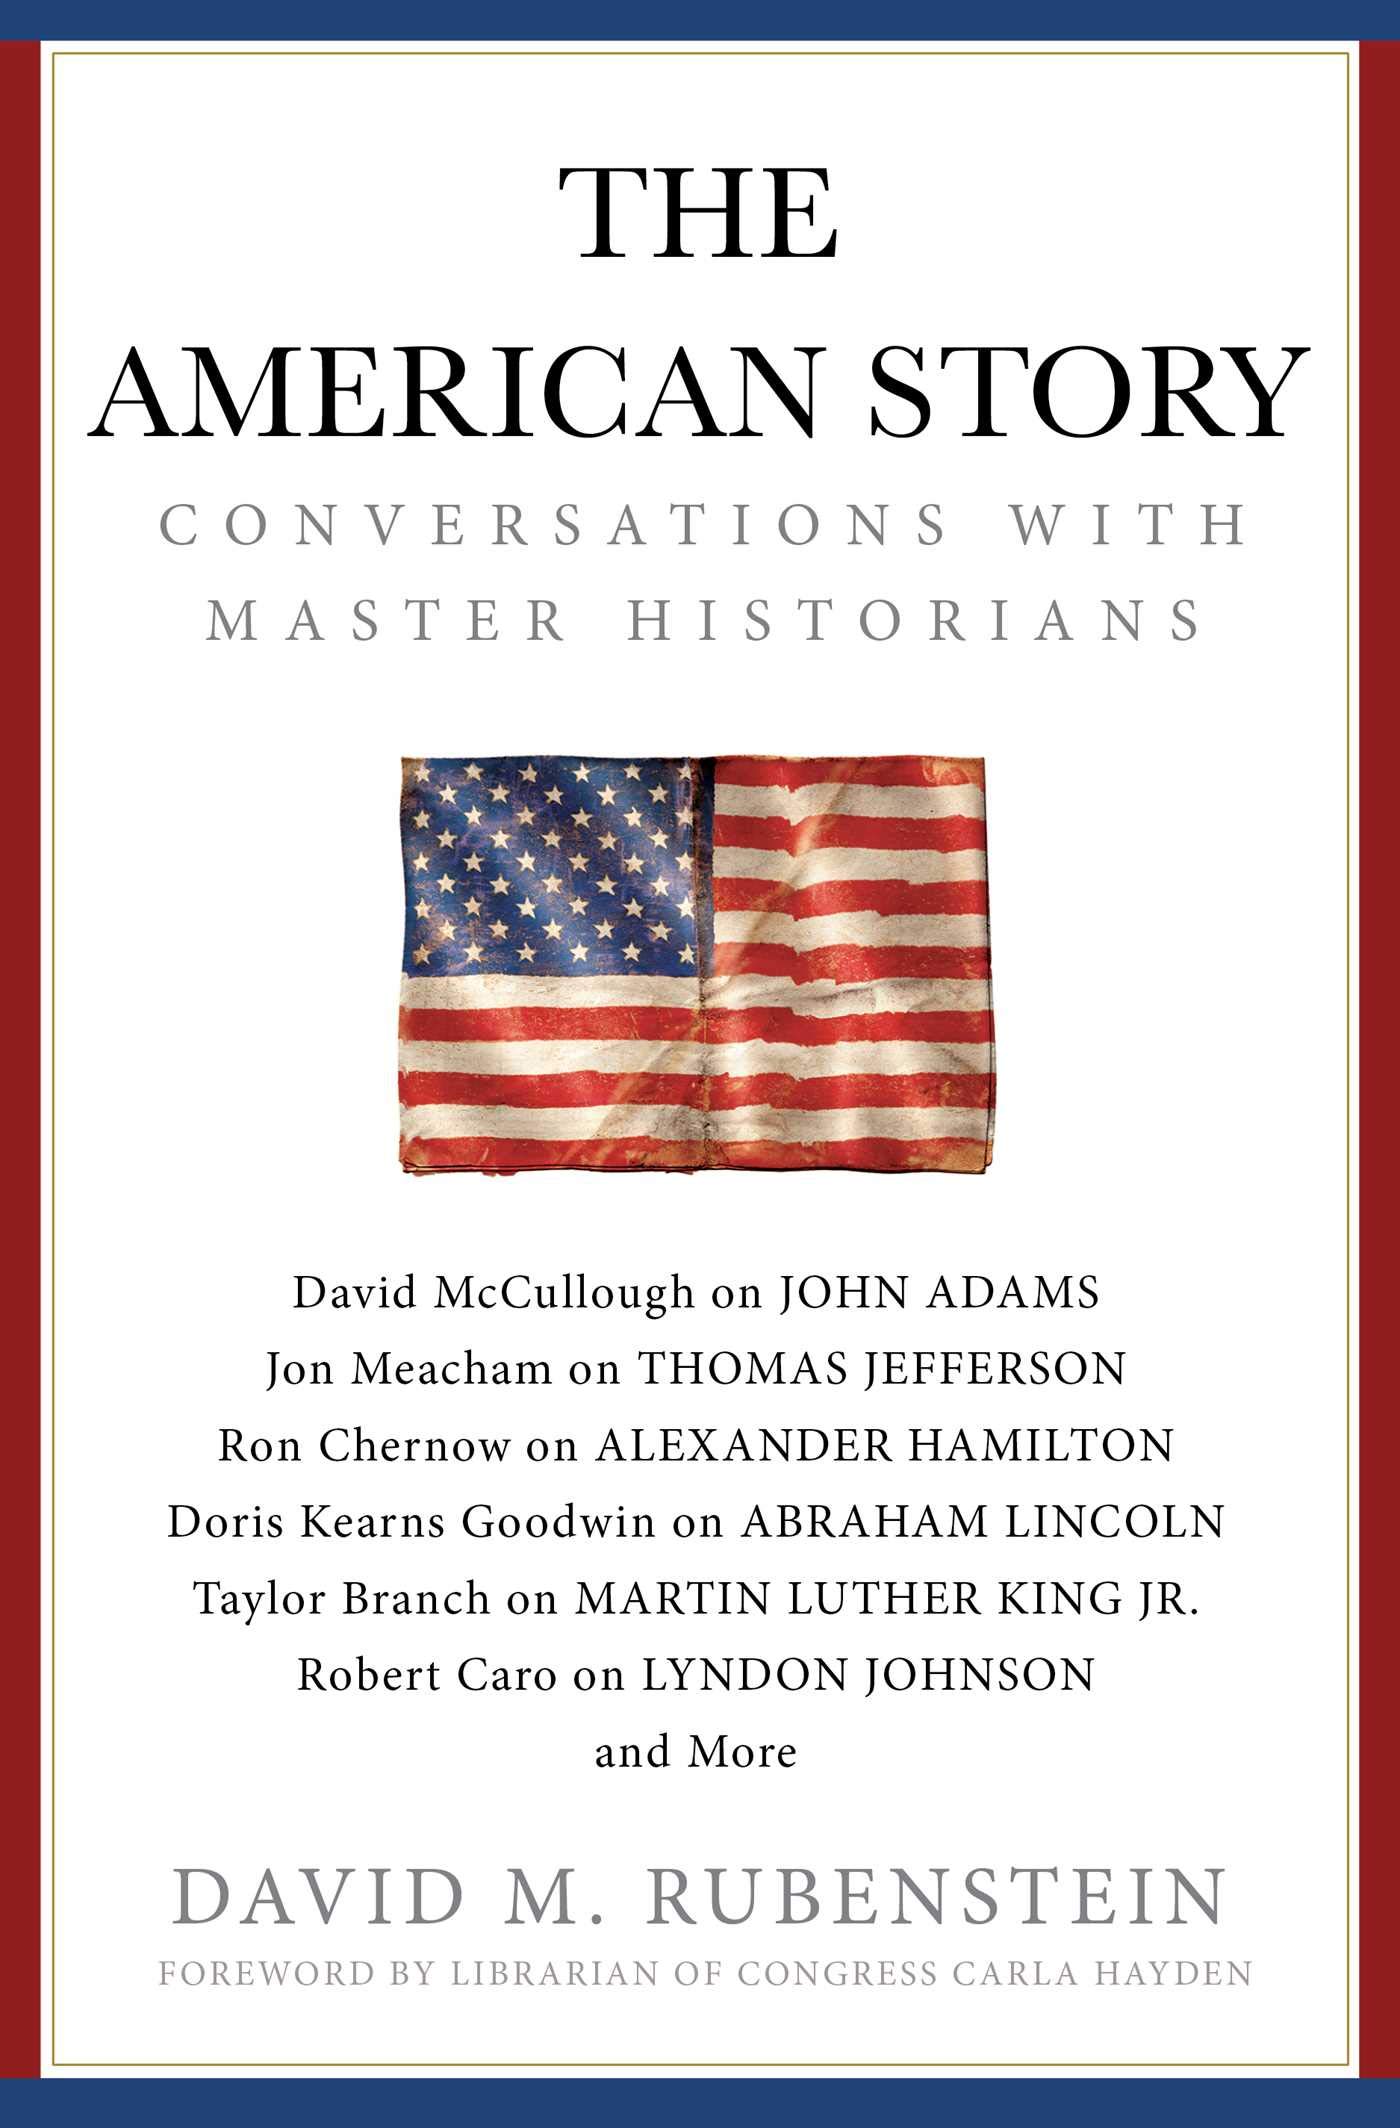 Image for "The American Story"